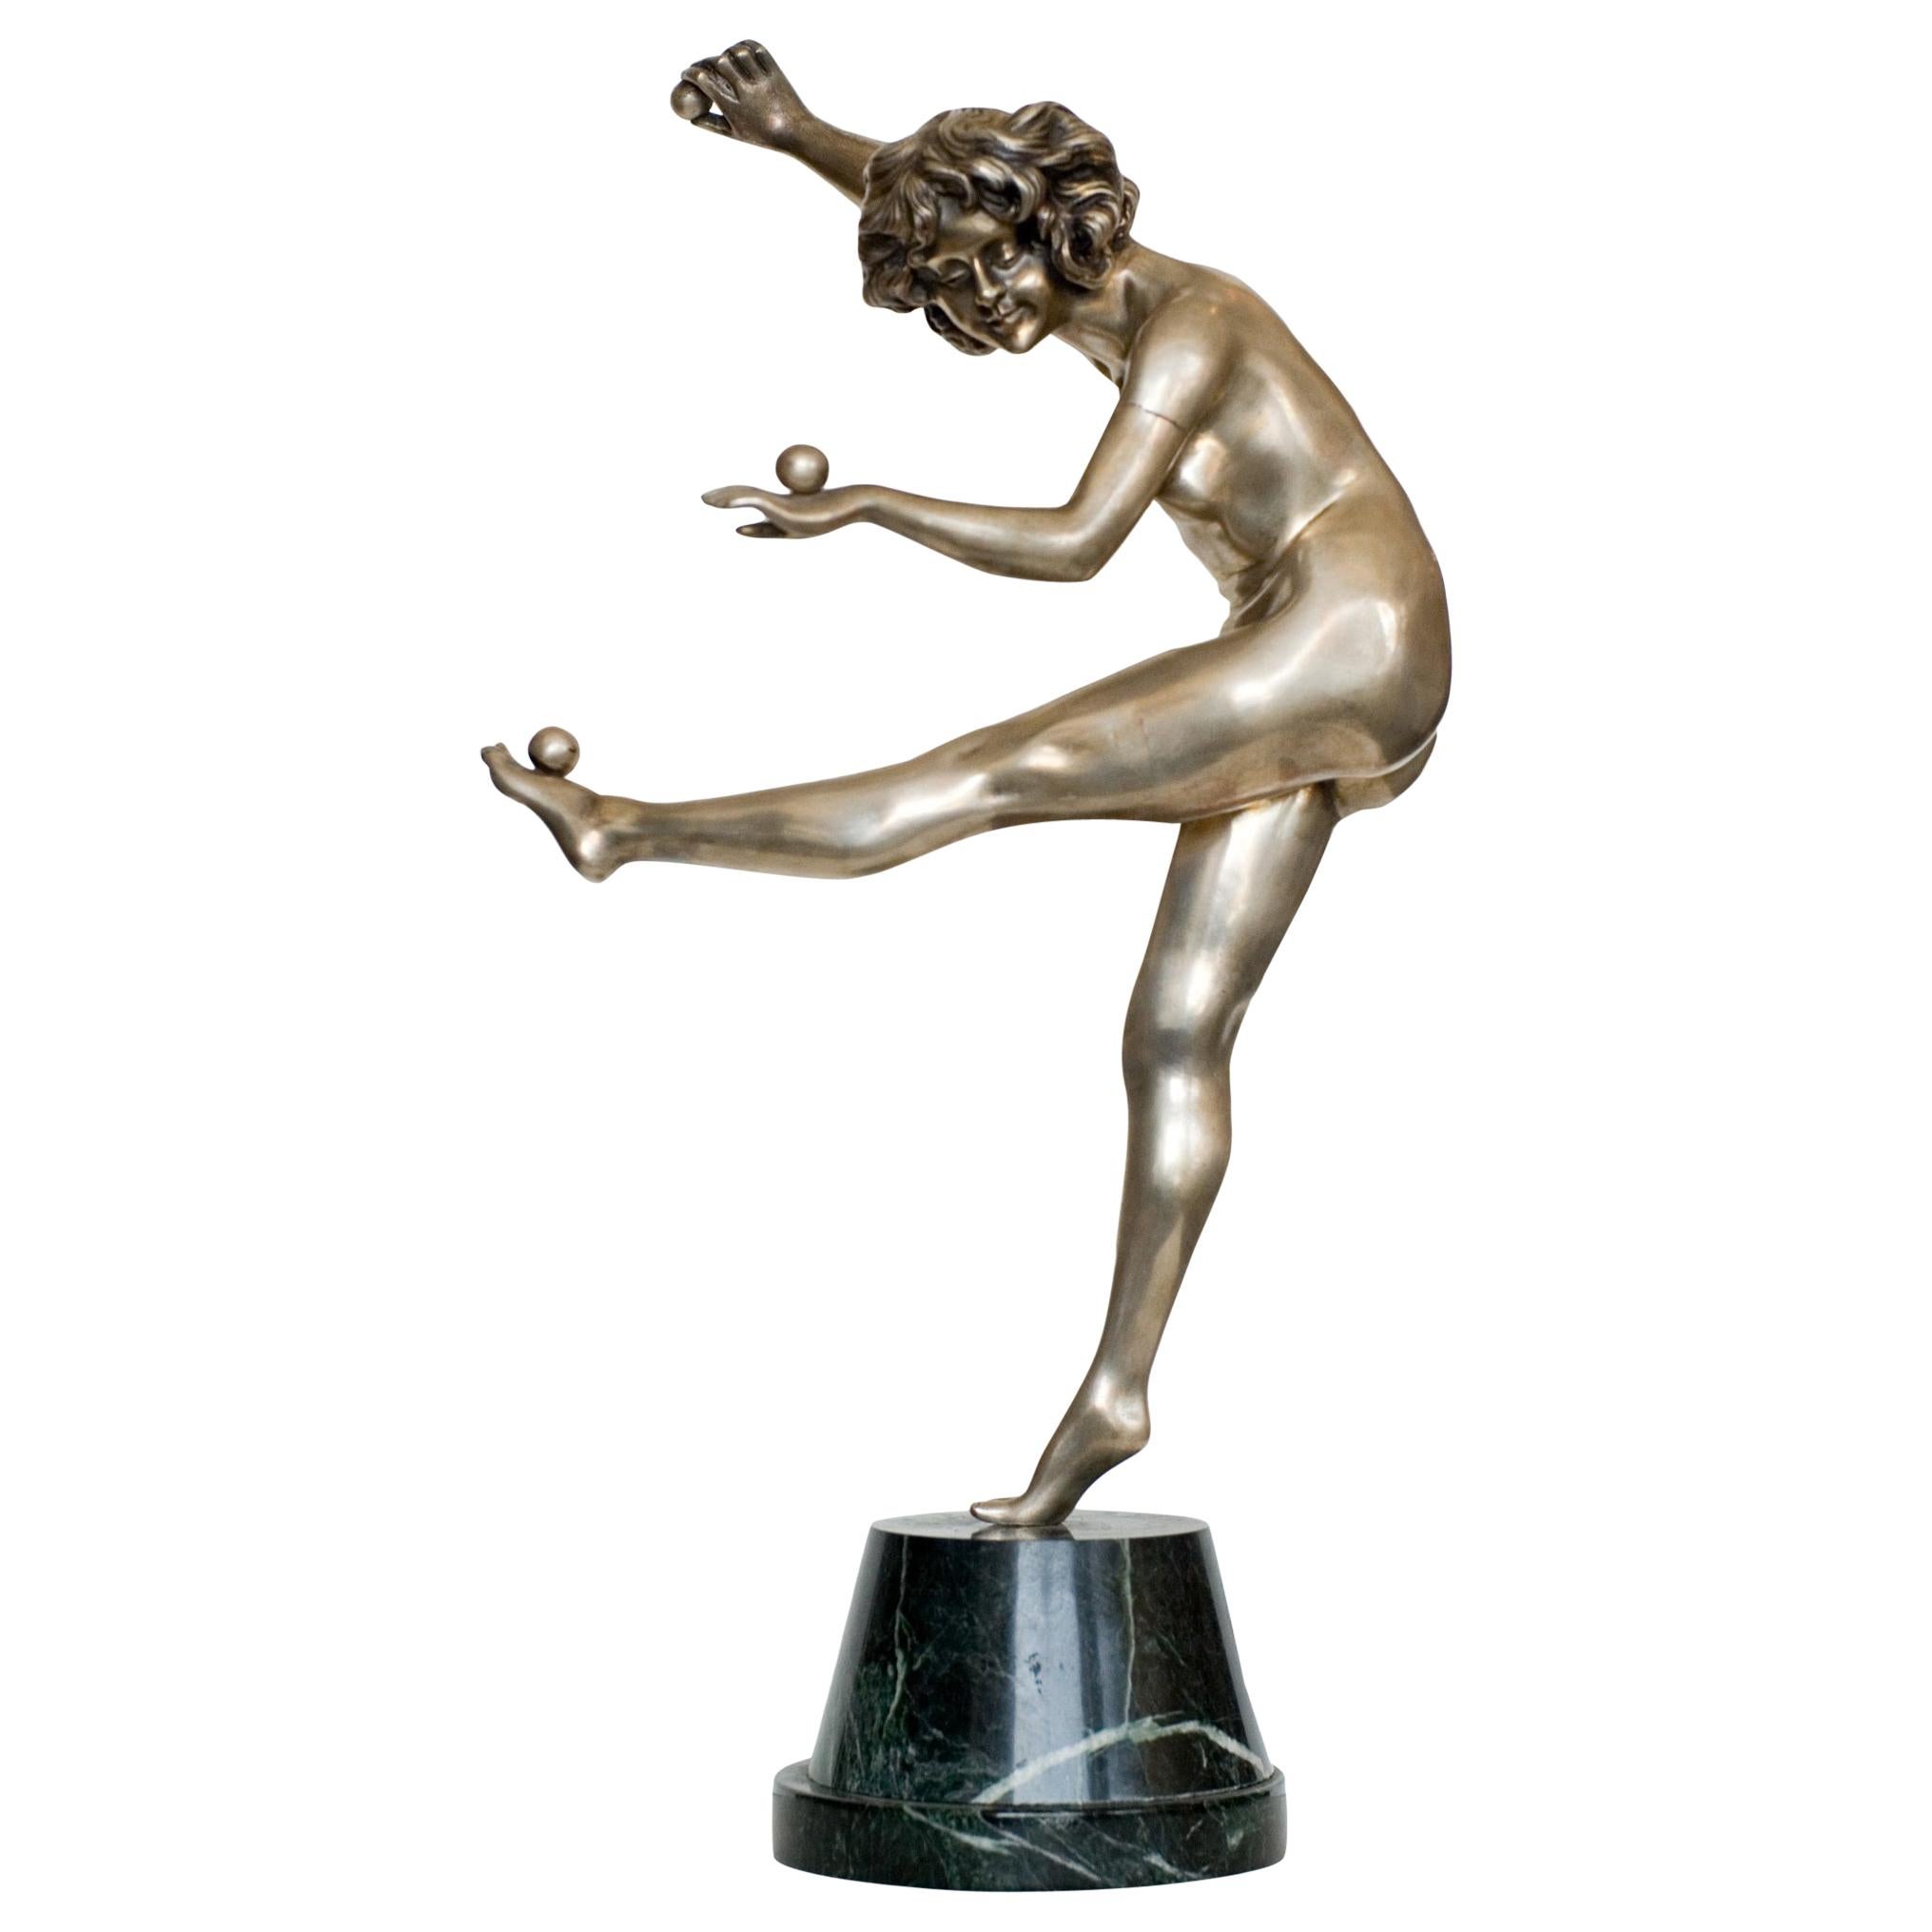 French Art Deco Bronze Figure 'The Juggler' by CJR Colinet